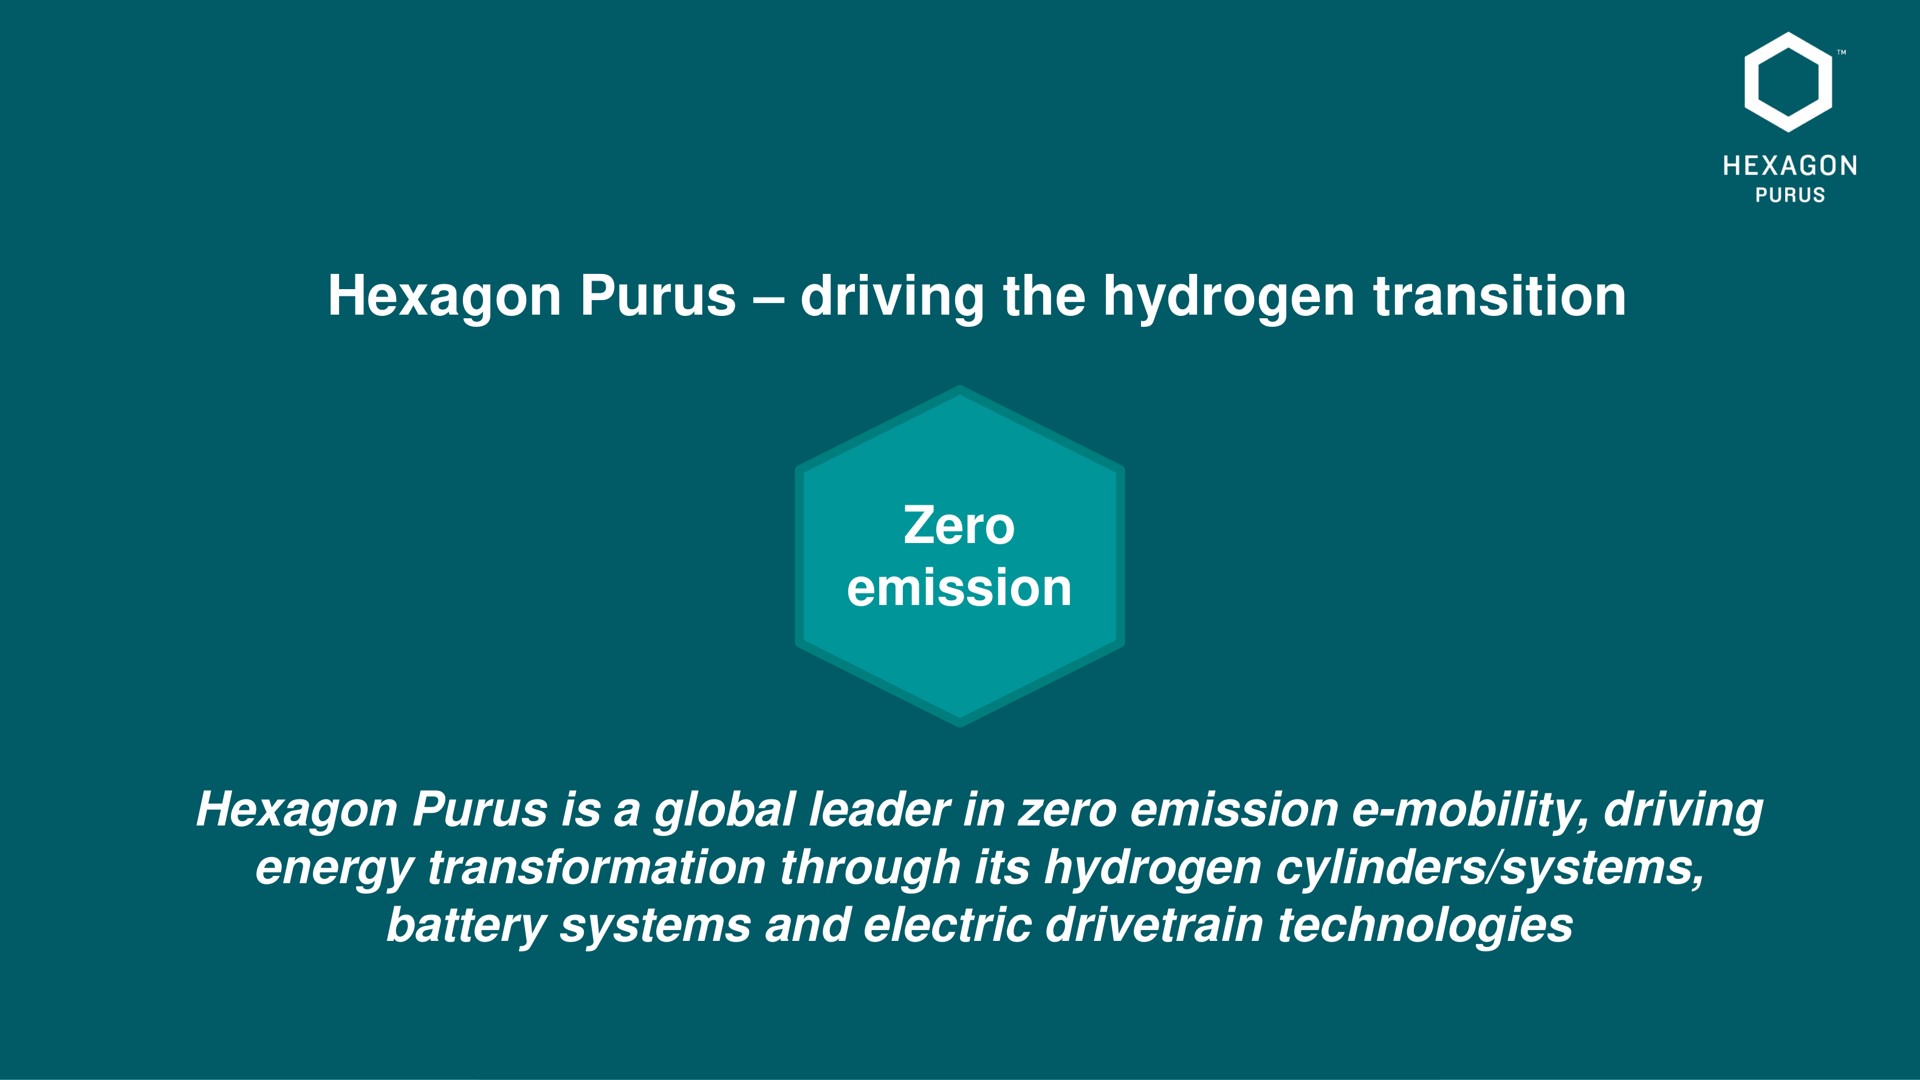 hexagon driving the hydrogen transition zero emission hexagon is a global leader in zero emission mobility driving energy transformation through its hydrogen cylinders systems battery systems and electric technologies | Hexagon Purus